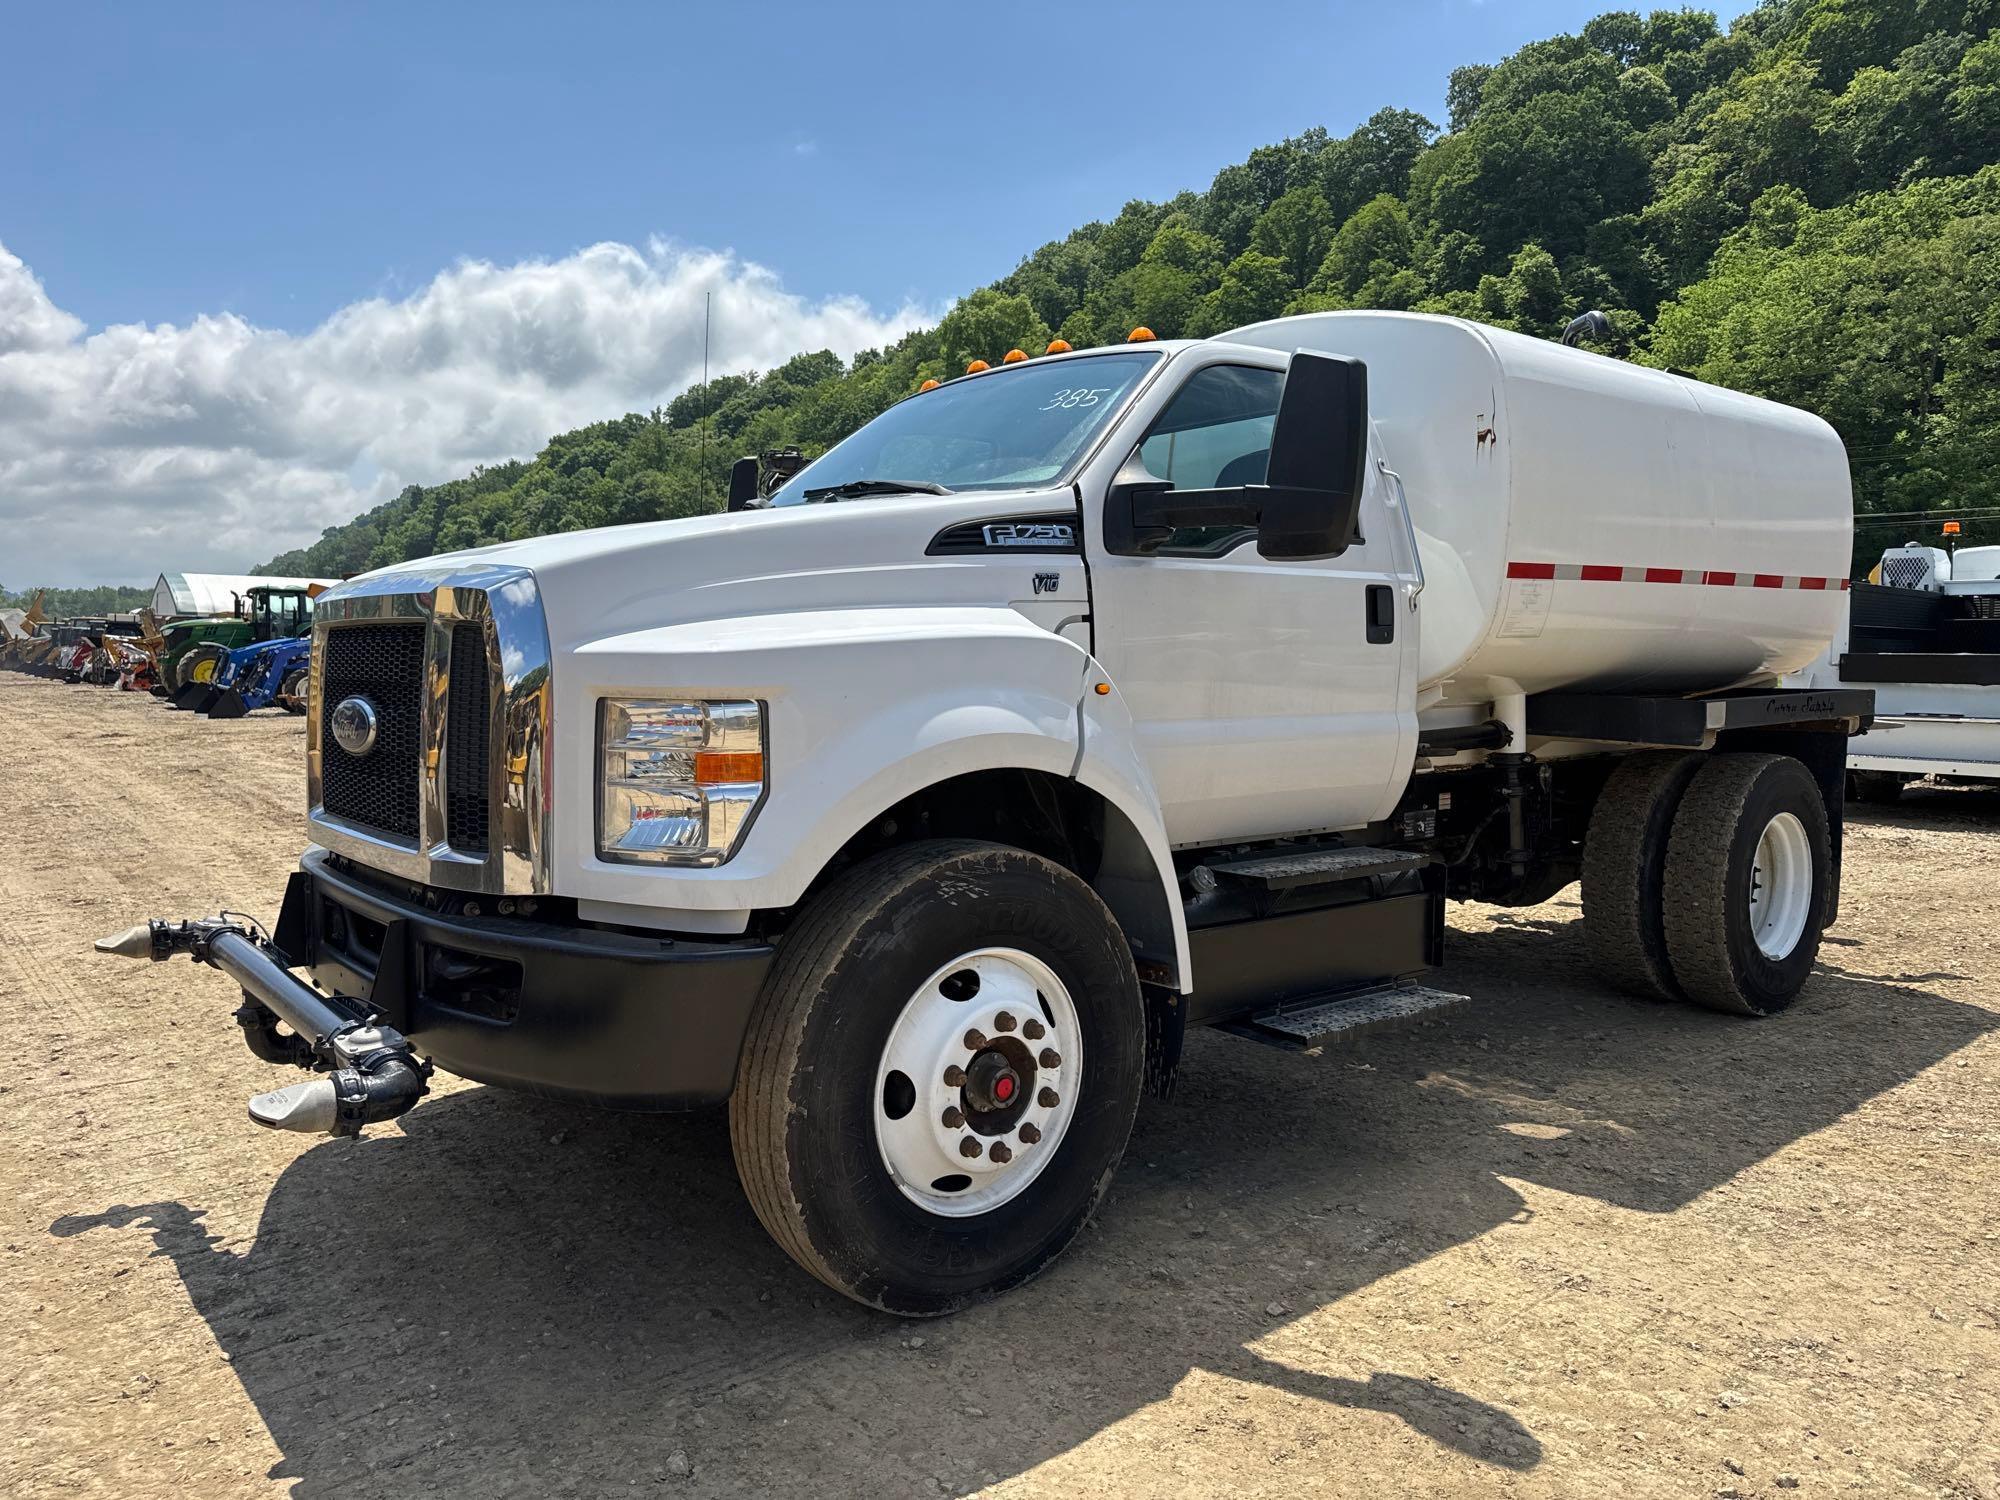 2017 FORD F750 WATER TRUCK VN:03553...powered by V10 gas engine, equipped with automatic transmissio